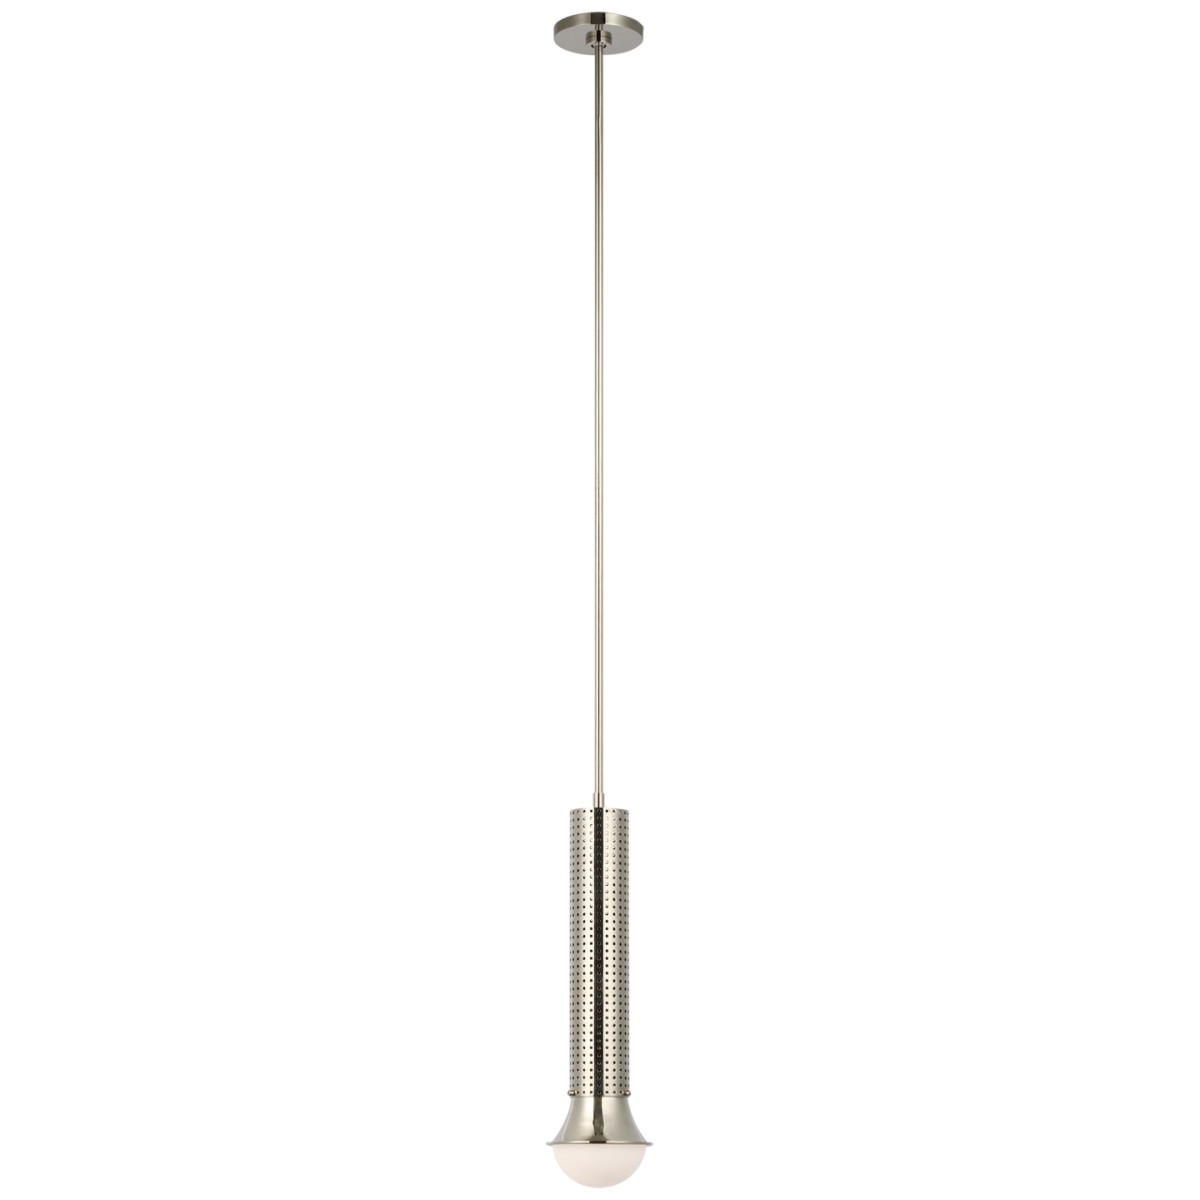 Precision Petite Elongated Pendant with White Glass | Highlight image